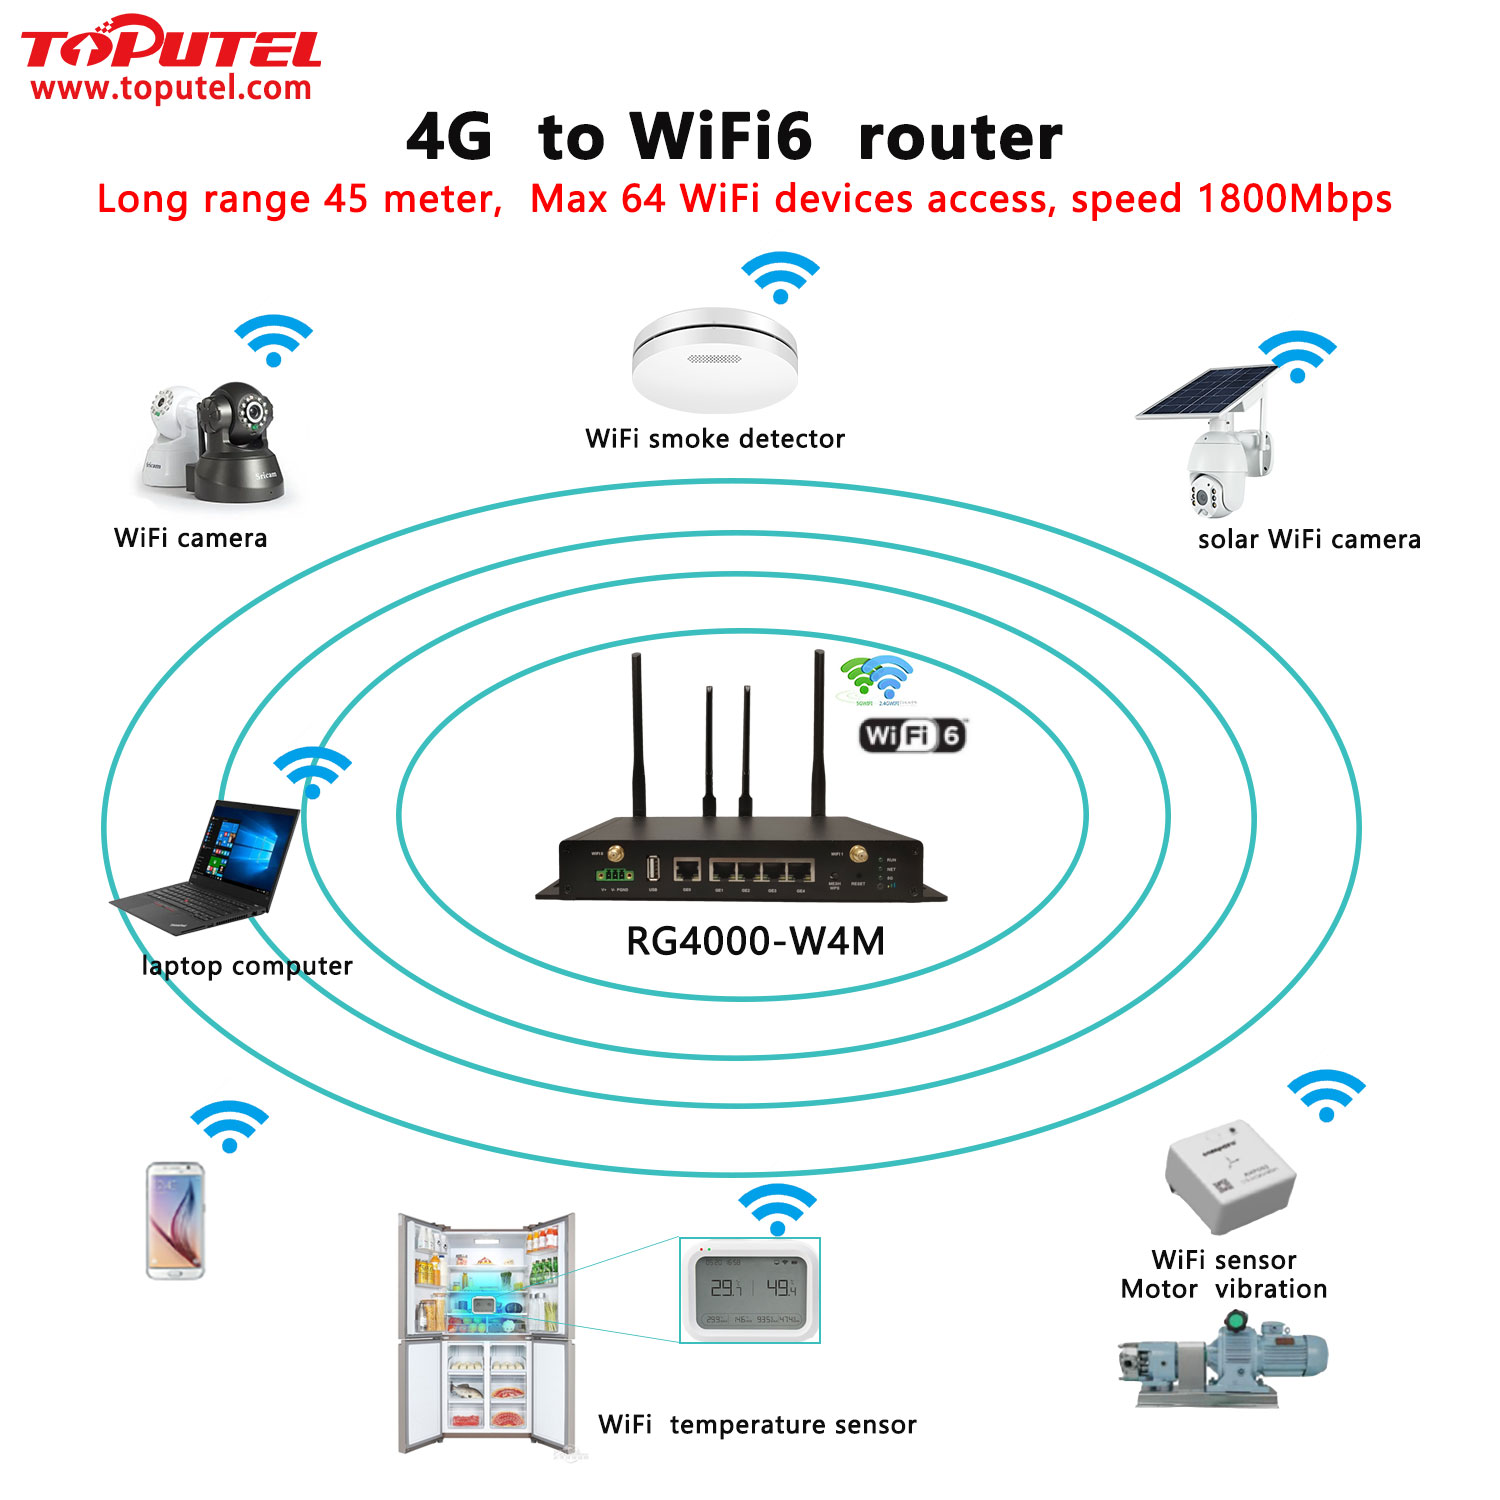 4G to WiFi6 router support WiFi sensors and WiFi camera access to internet - 4G Industrial Router RG4000-W4M 